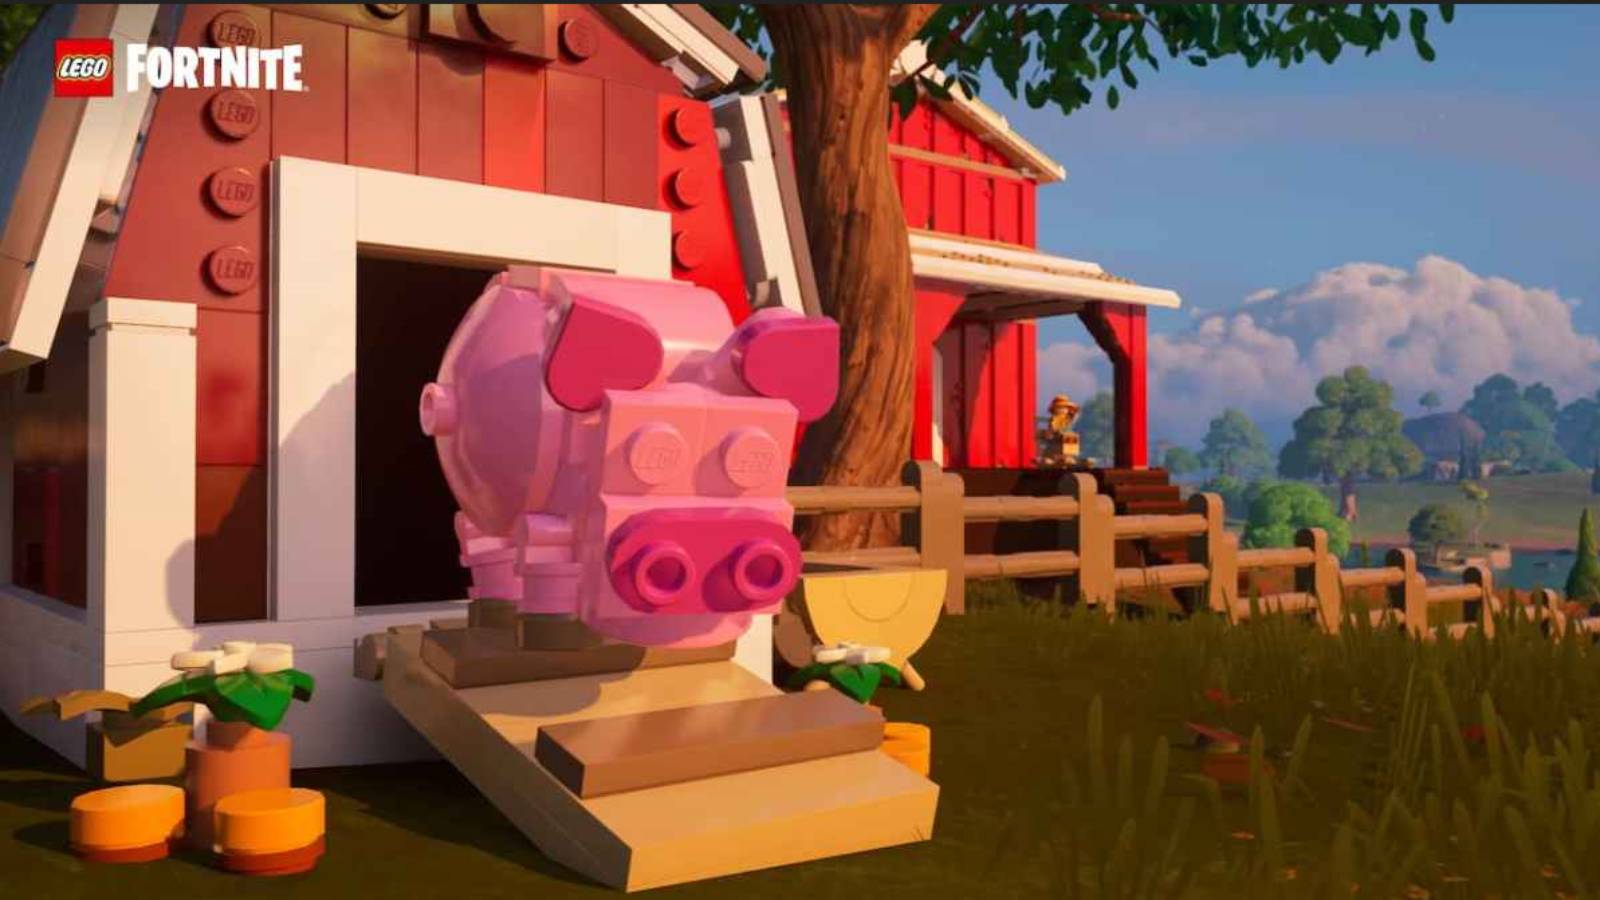 LEGO Fortnite pig coming out of Animal House